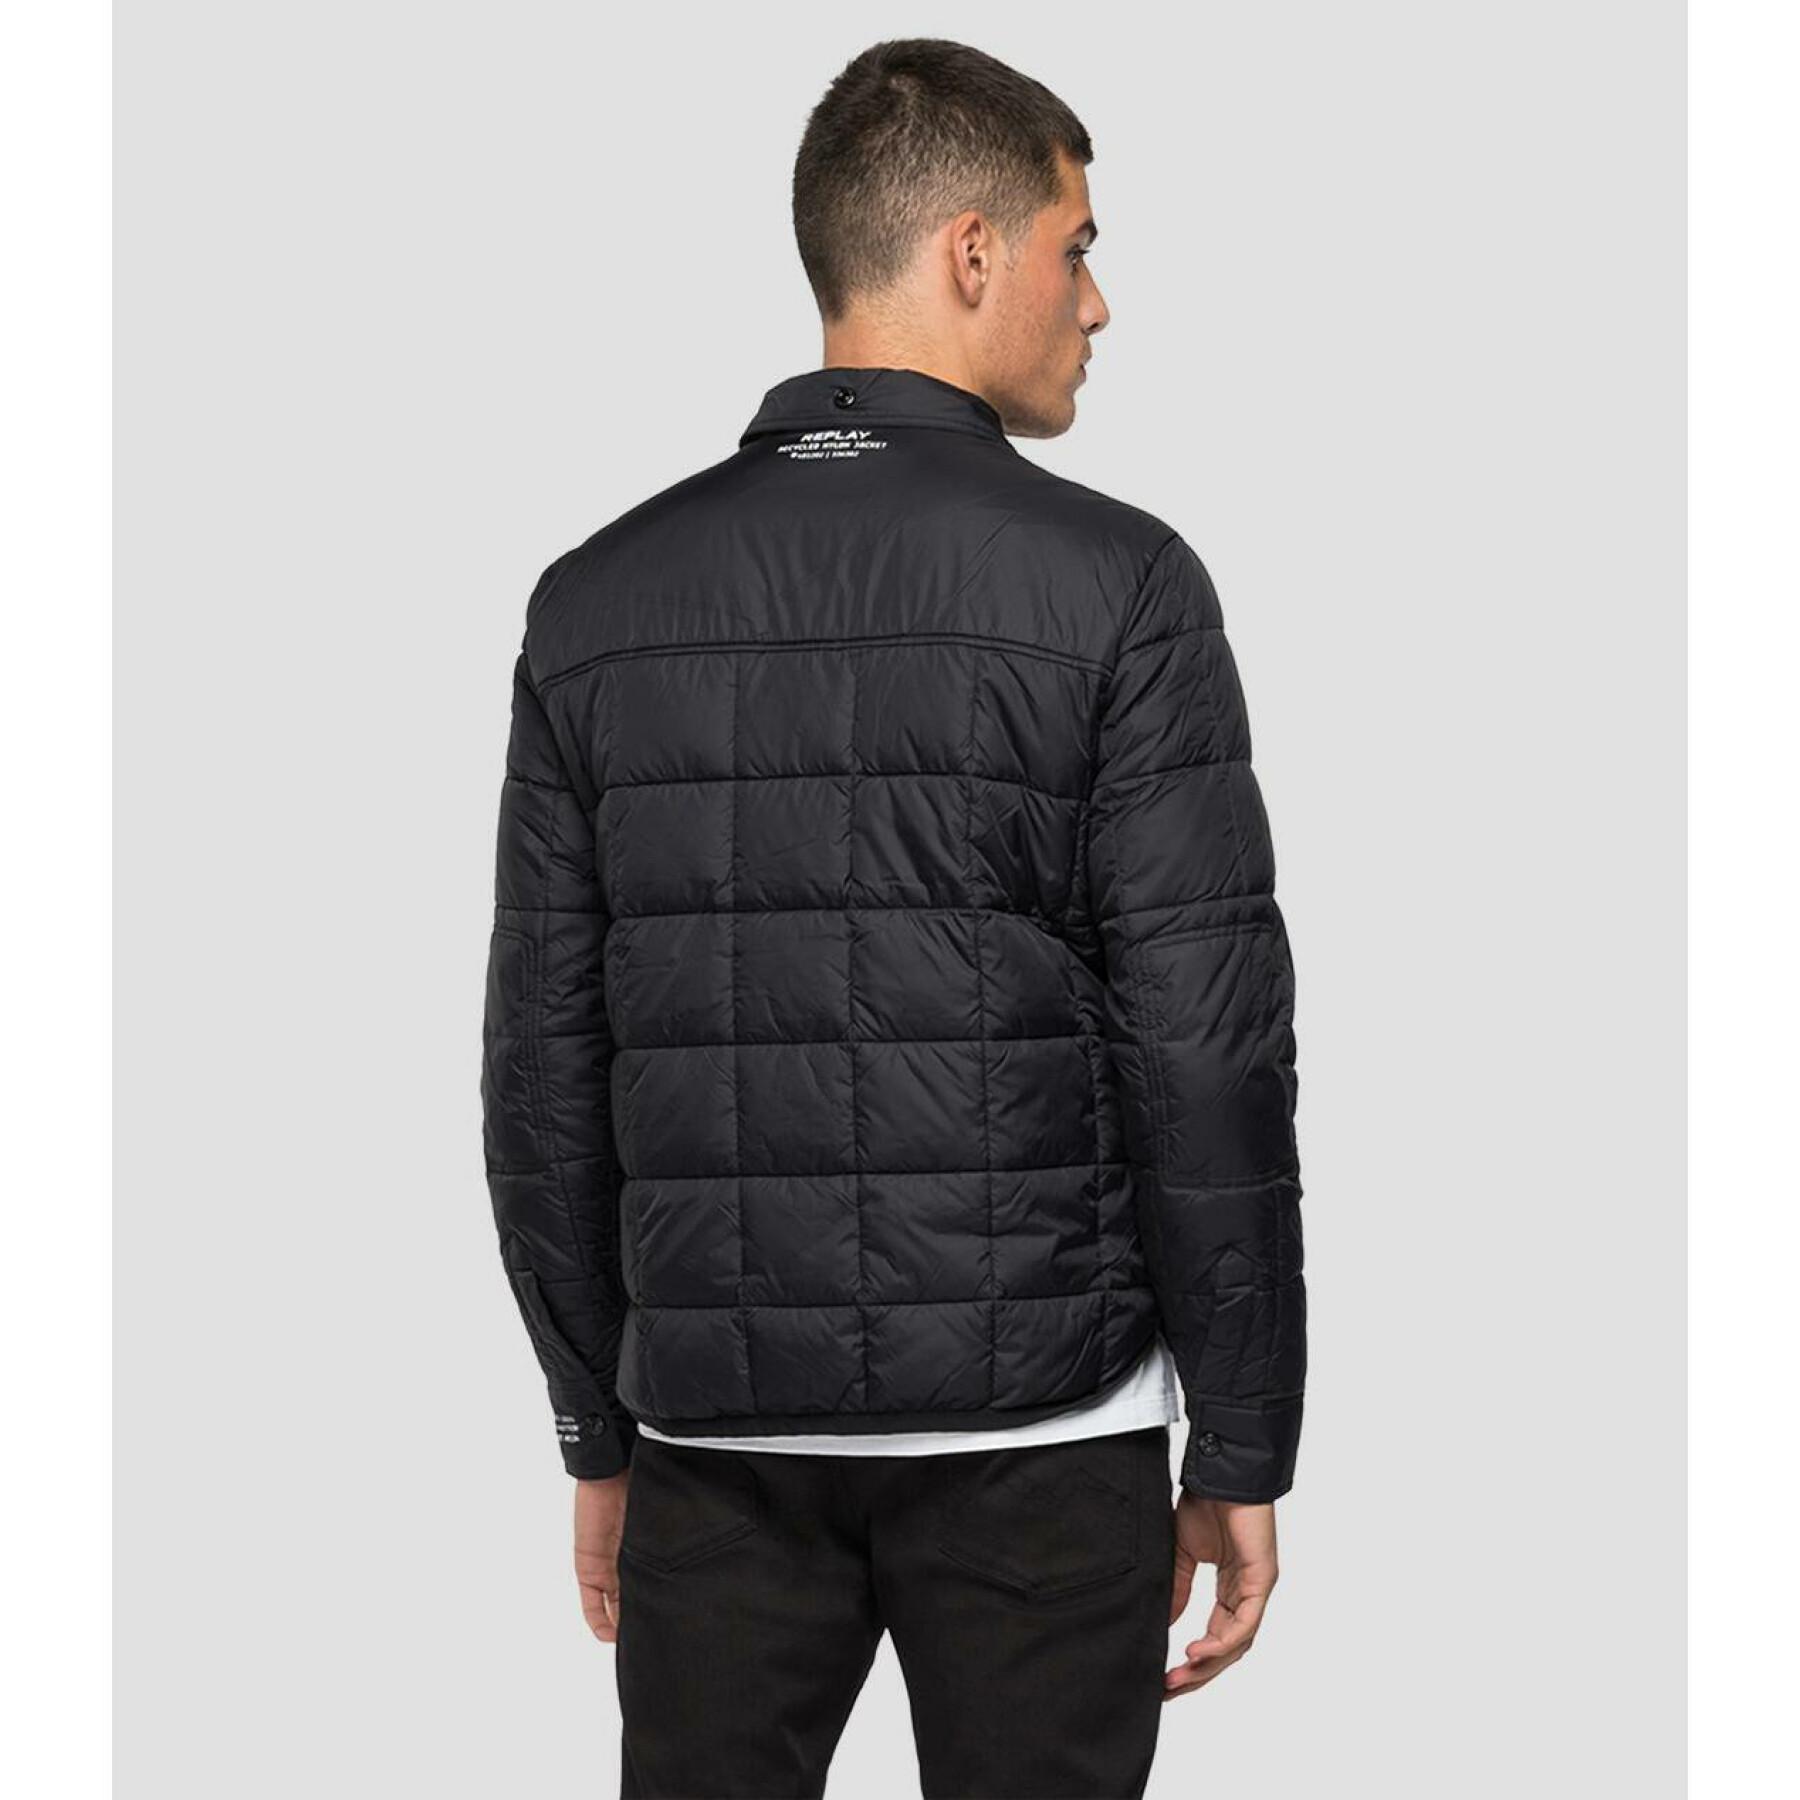 Blouson surchemise Replay recycled